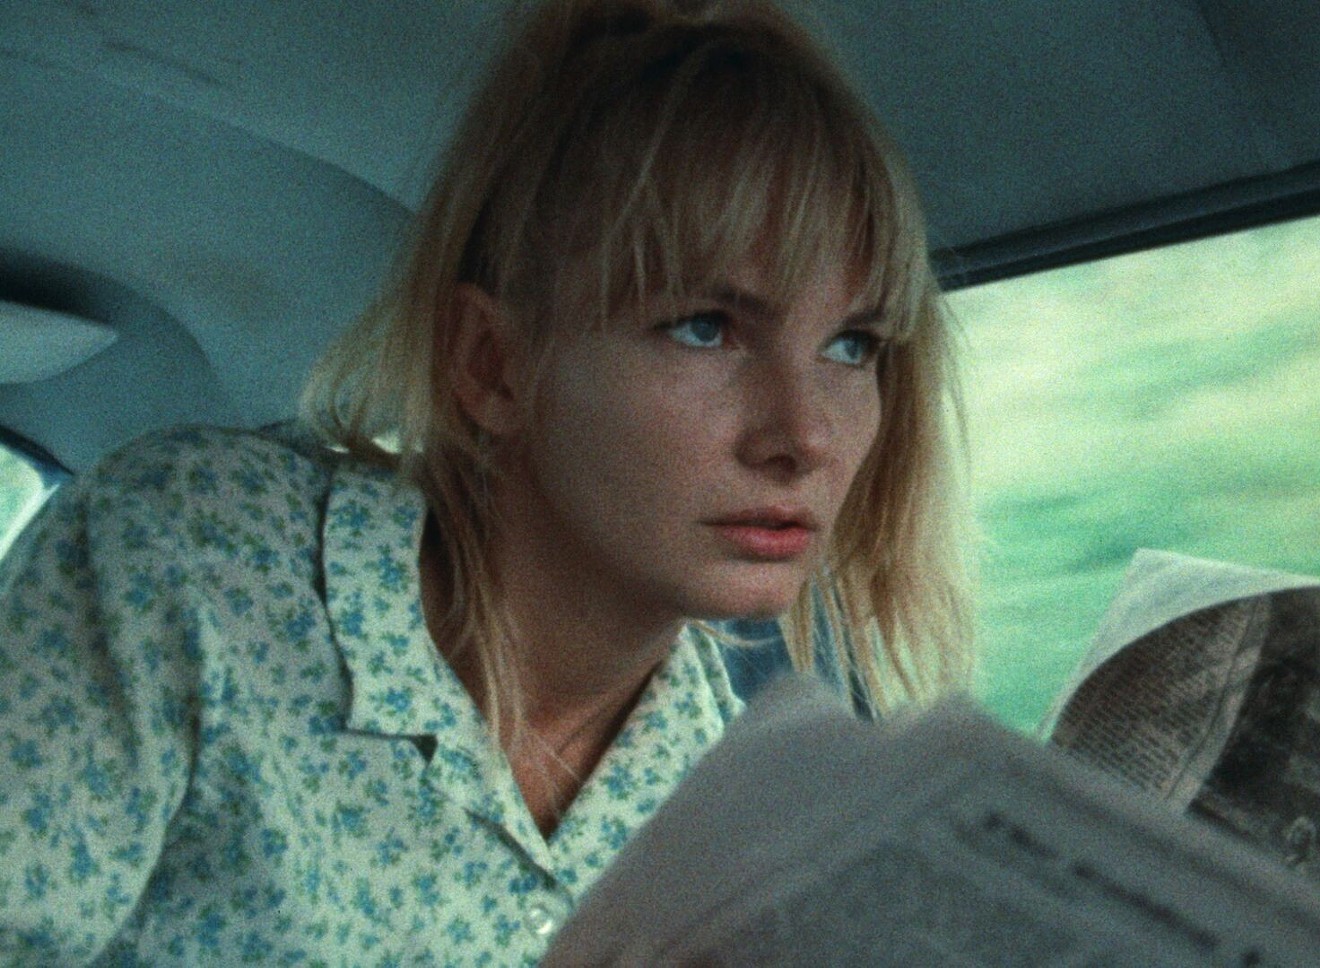 Barbara Loden stars as the title character in the 1971 drama Wanda, the film she wrote and directed about a woman drifting through life in the company of an insecure man who longs to dominate anyone or anything.